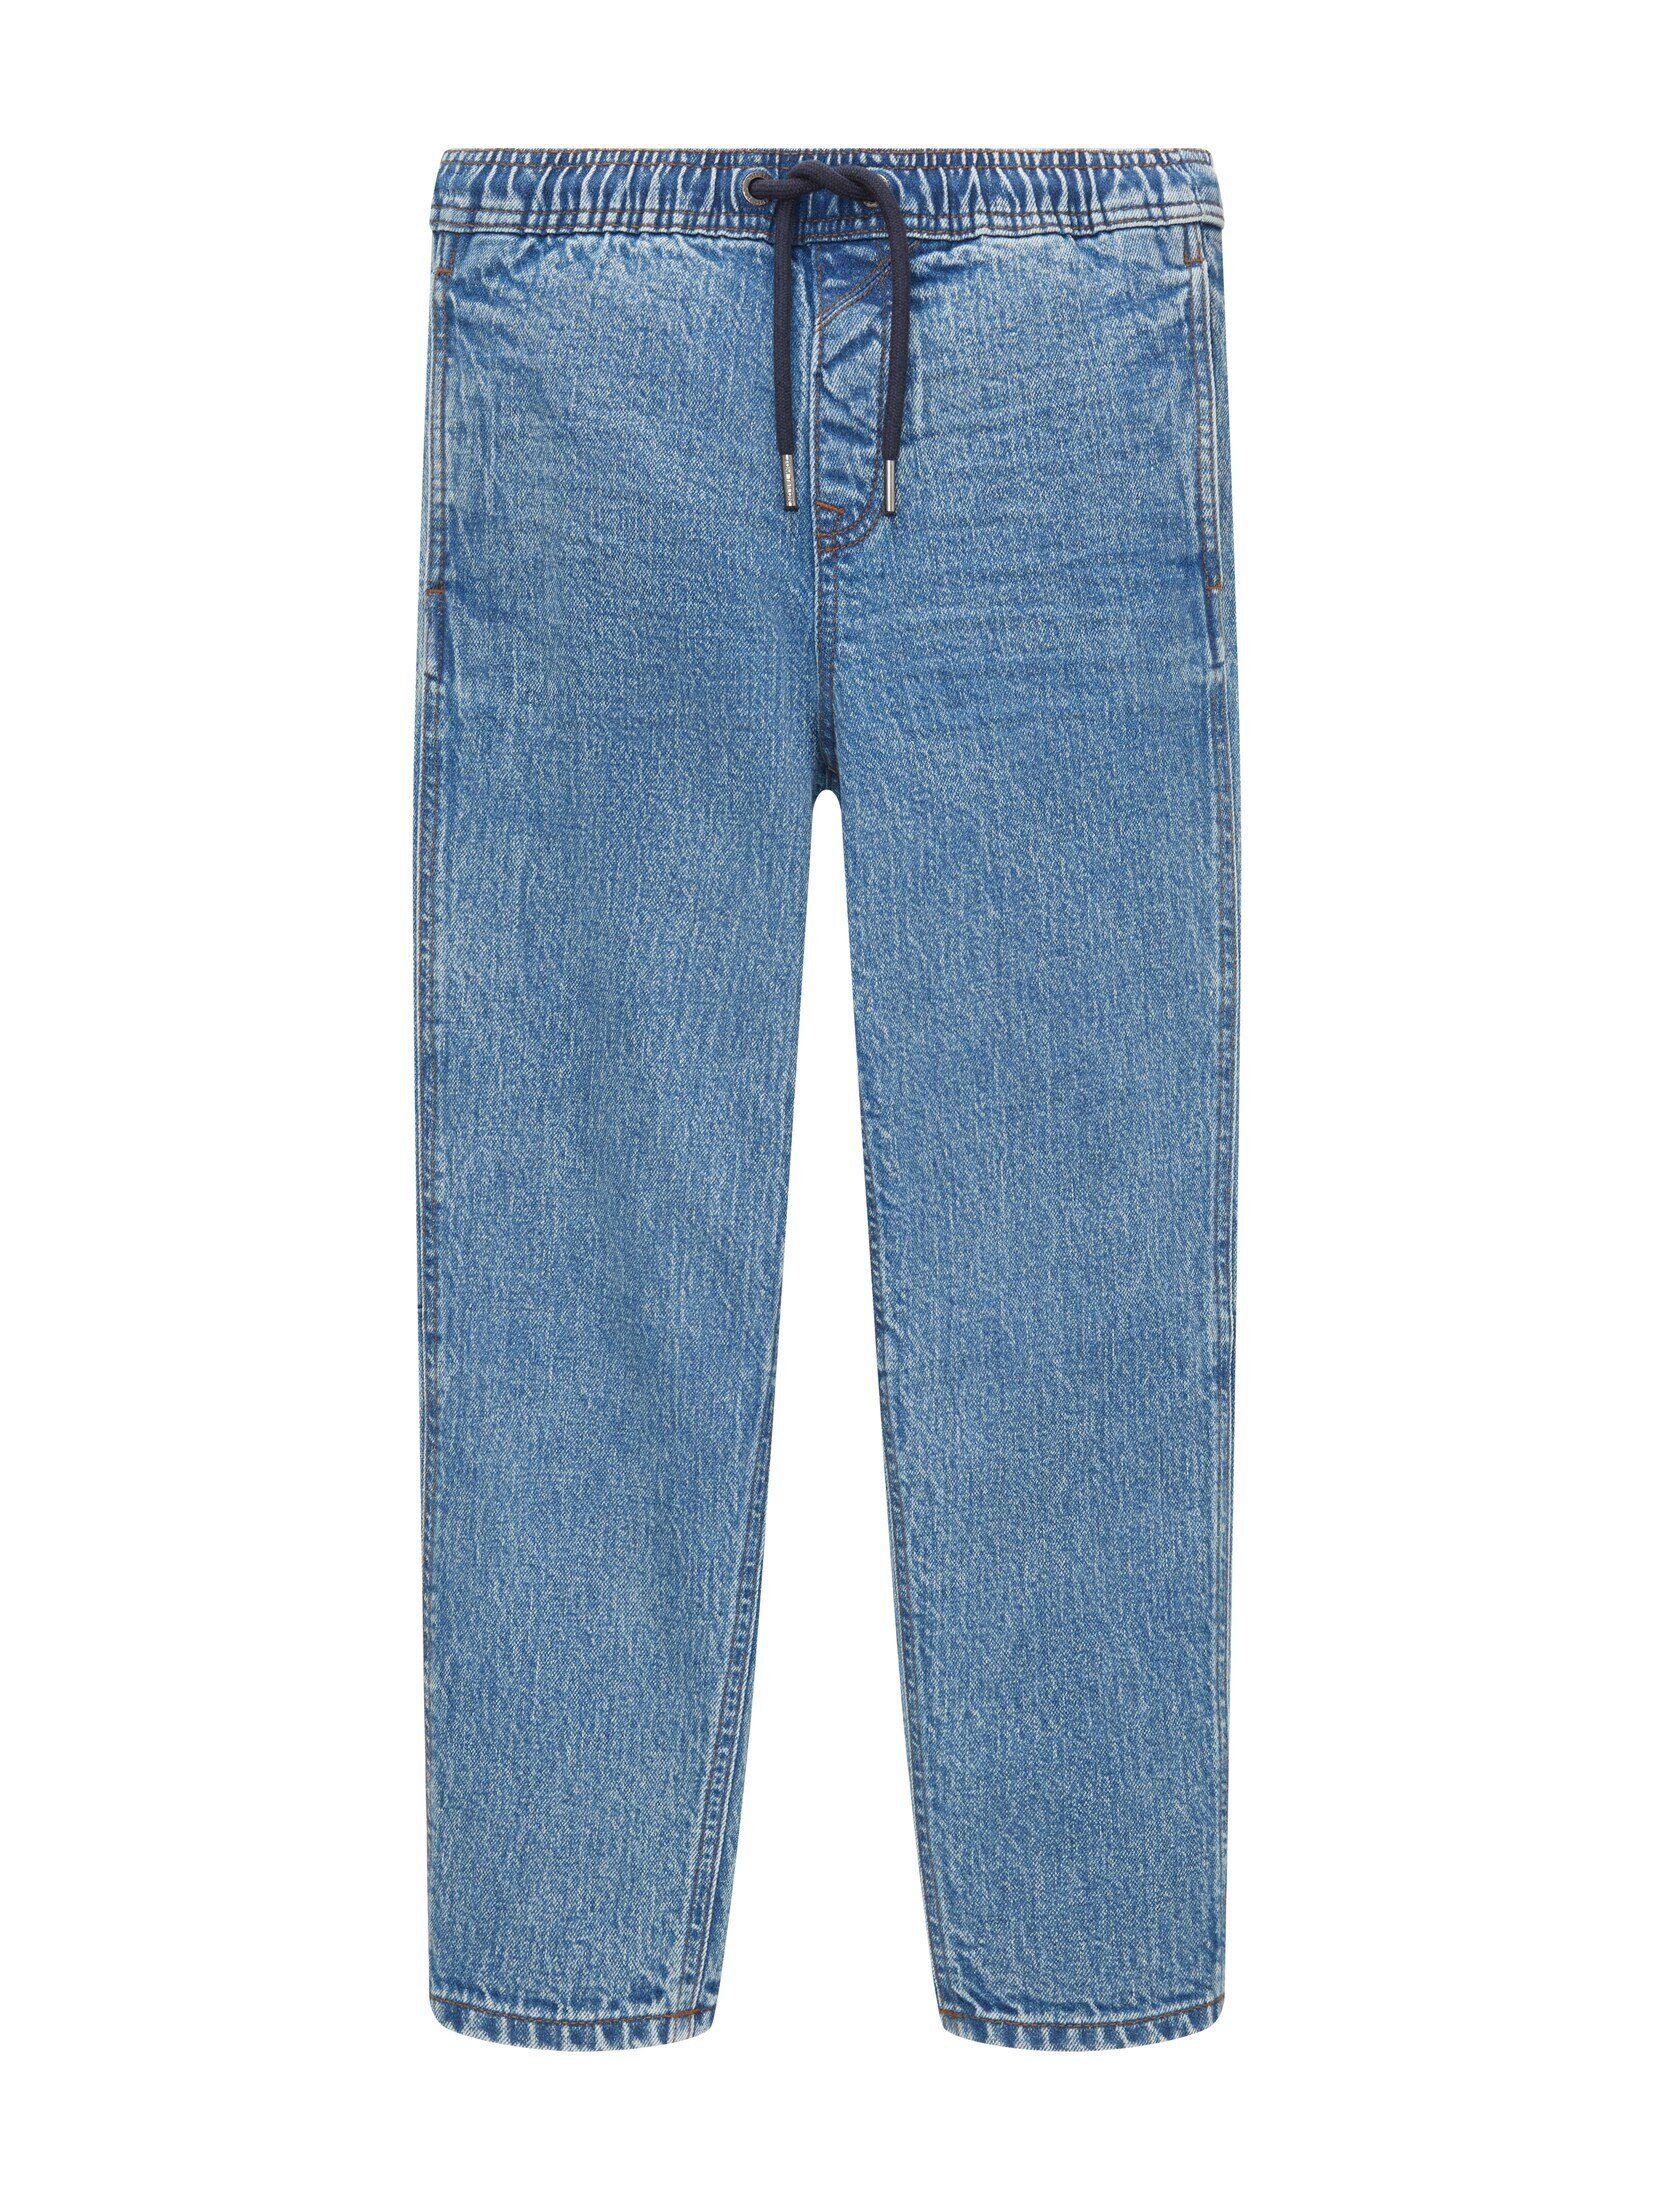 TOM TAILOR Gerade Jeans Relaxed Fit Jeans